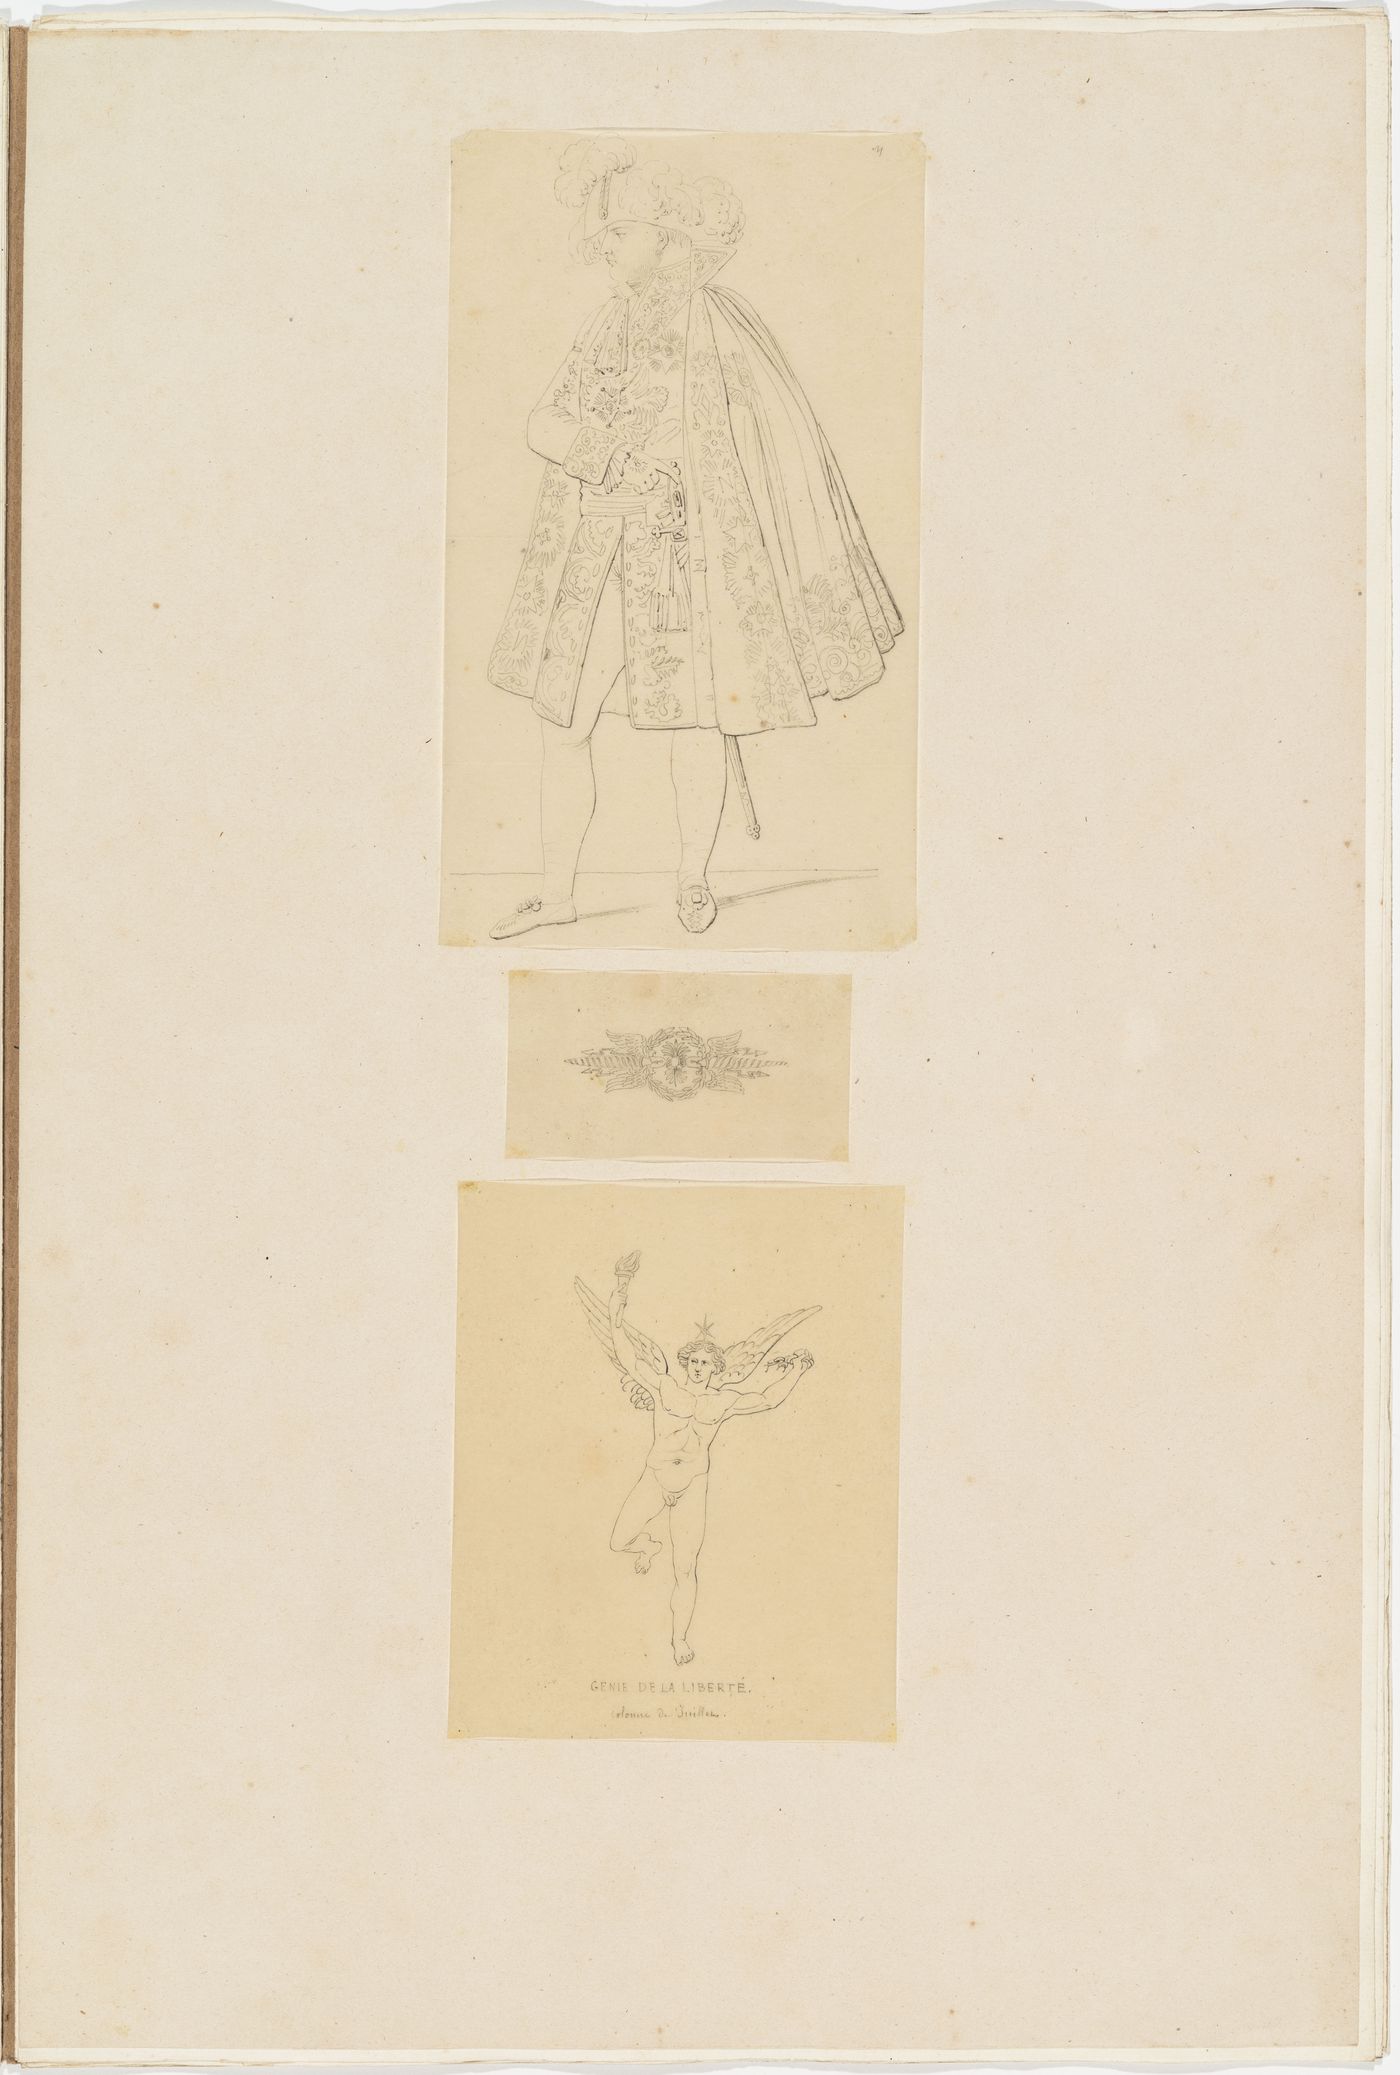 Drawing of Napoleon with a plumed hat, cape, and jacket; Drawing of a decorative wreath with two pairs of eagle wings; Drawing of the "Genie de la Liberté" from the Colonne de Juillet, Paris